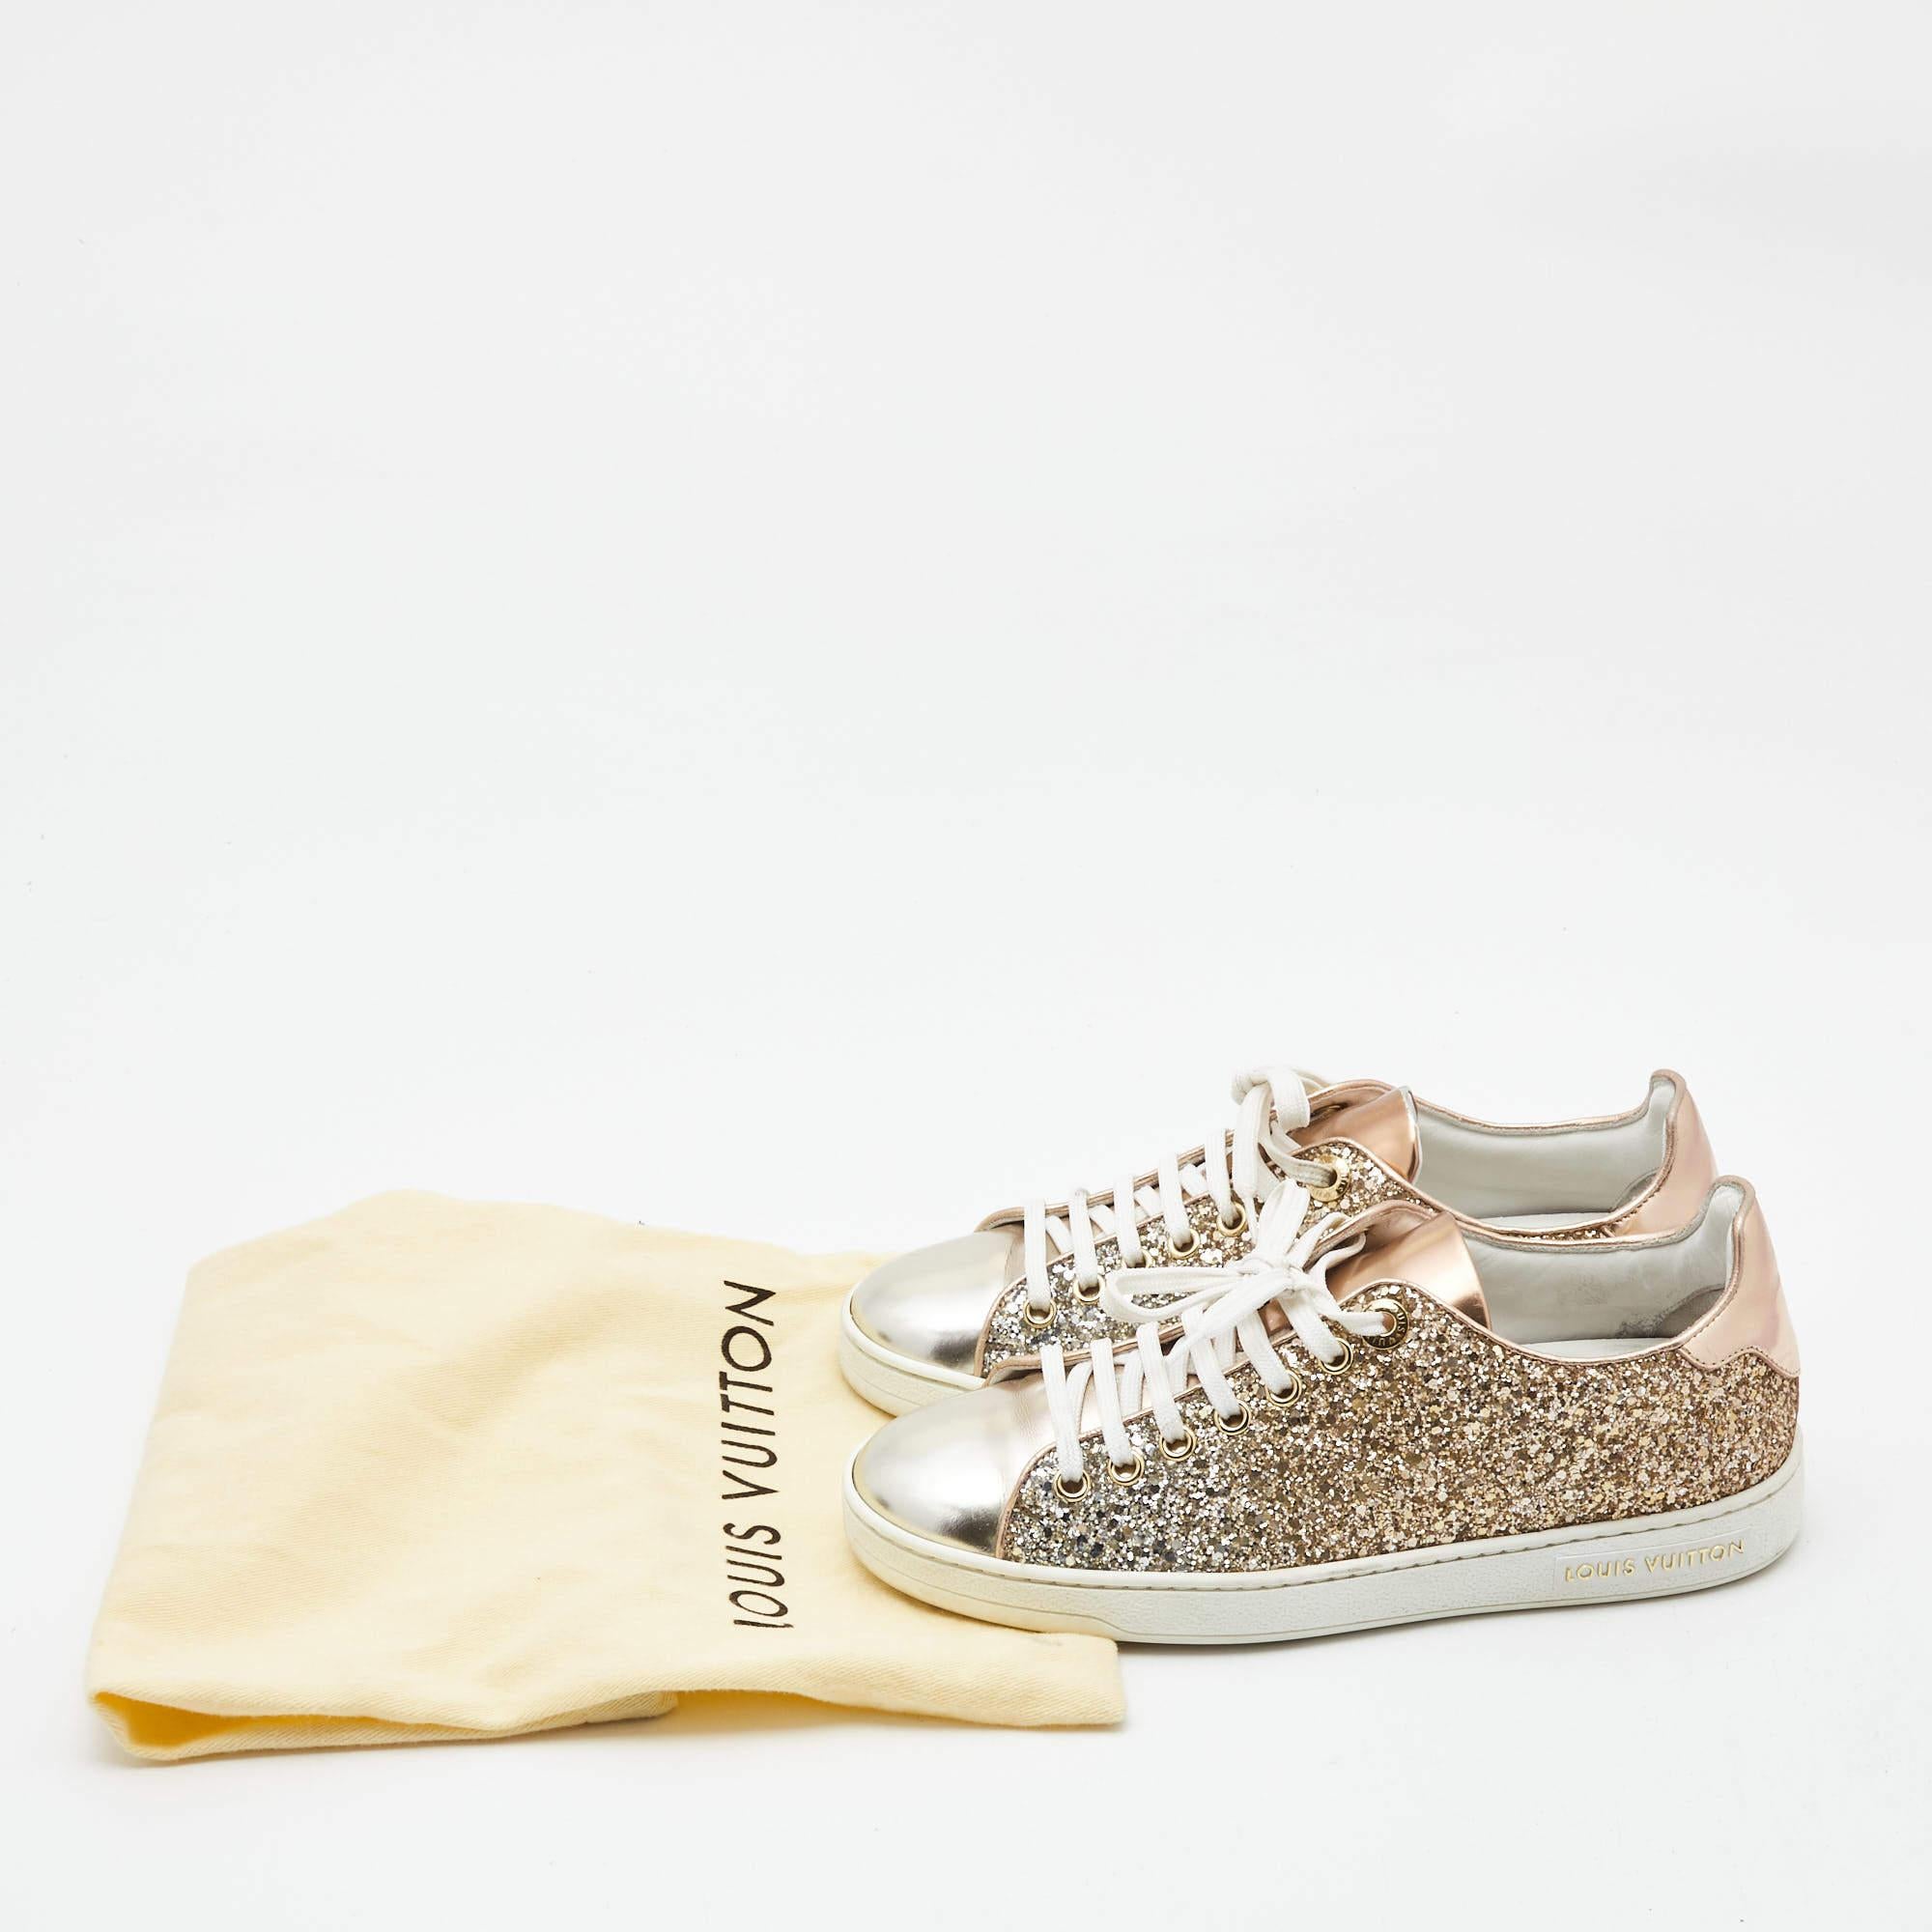 Louis Vuitton Two Tone Leather and Coarse Glitter Frontrow Sneakers Size 35 6